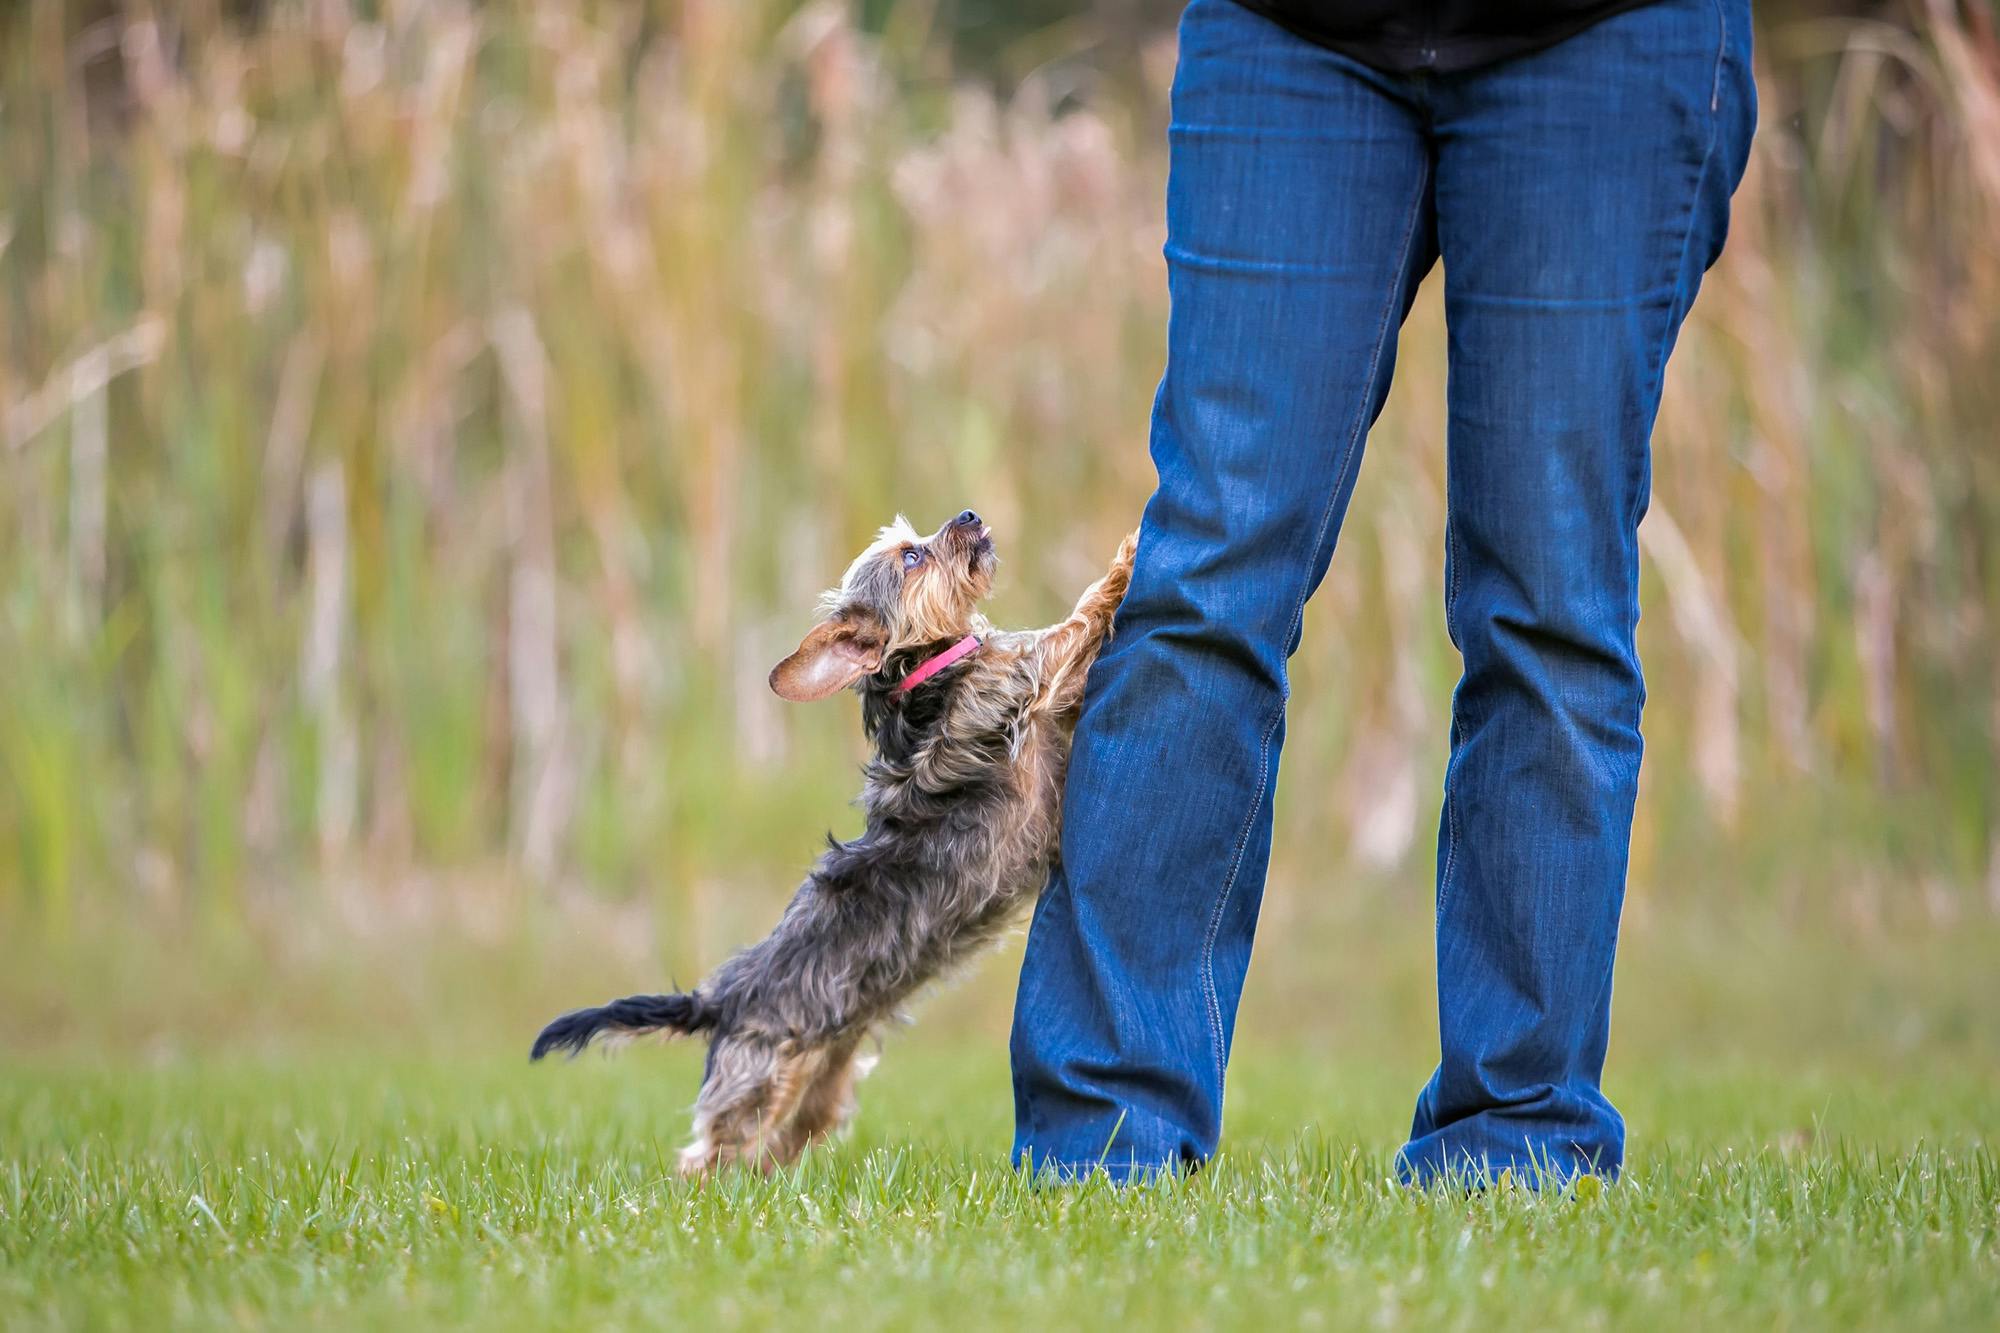 Yorkie jumping up at person's legs